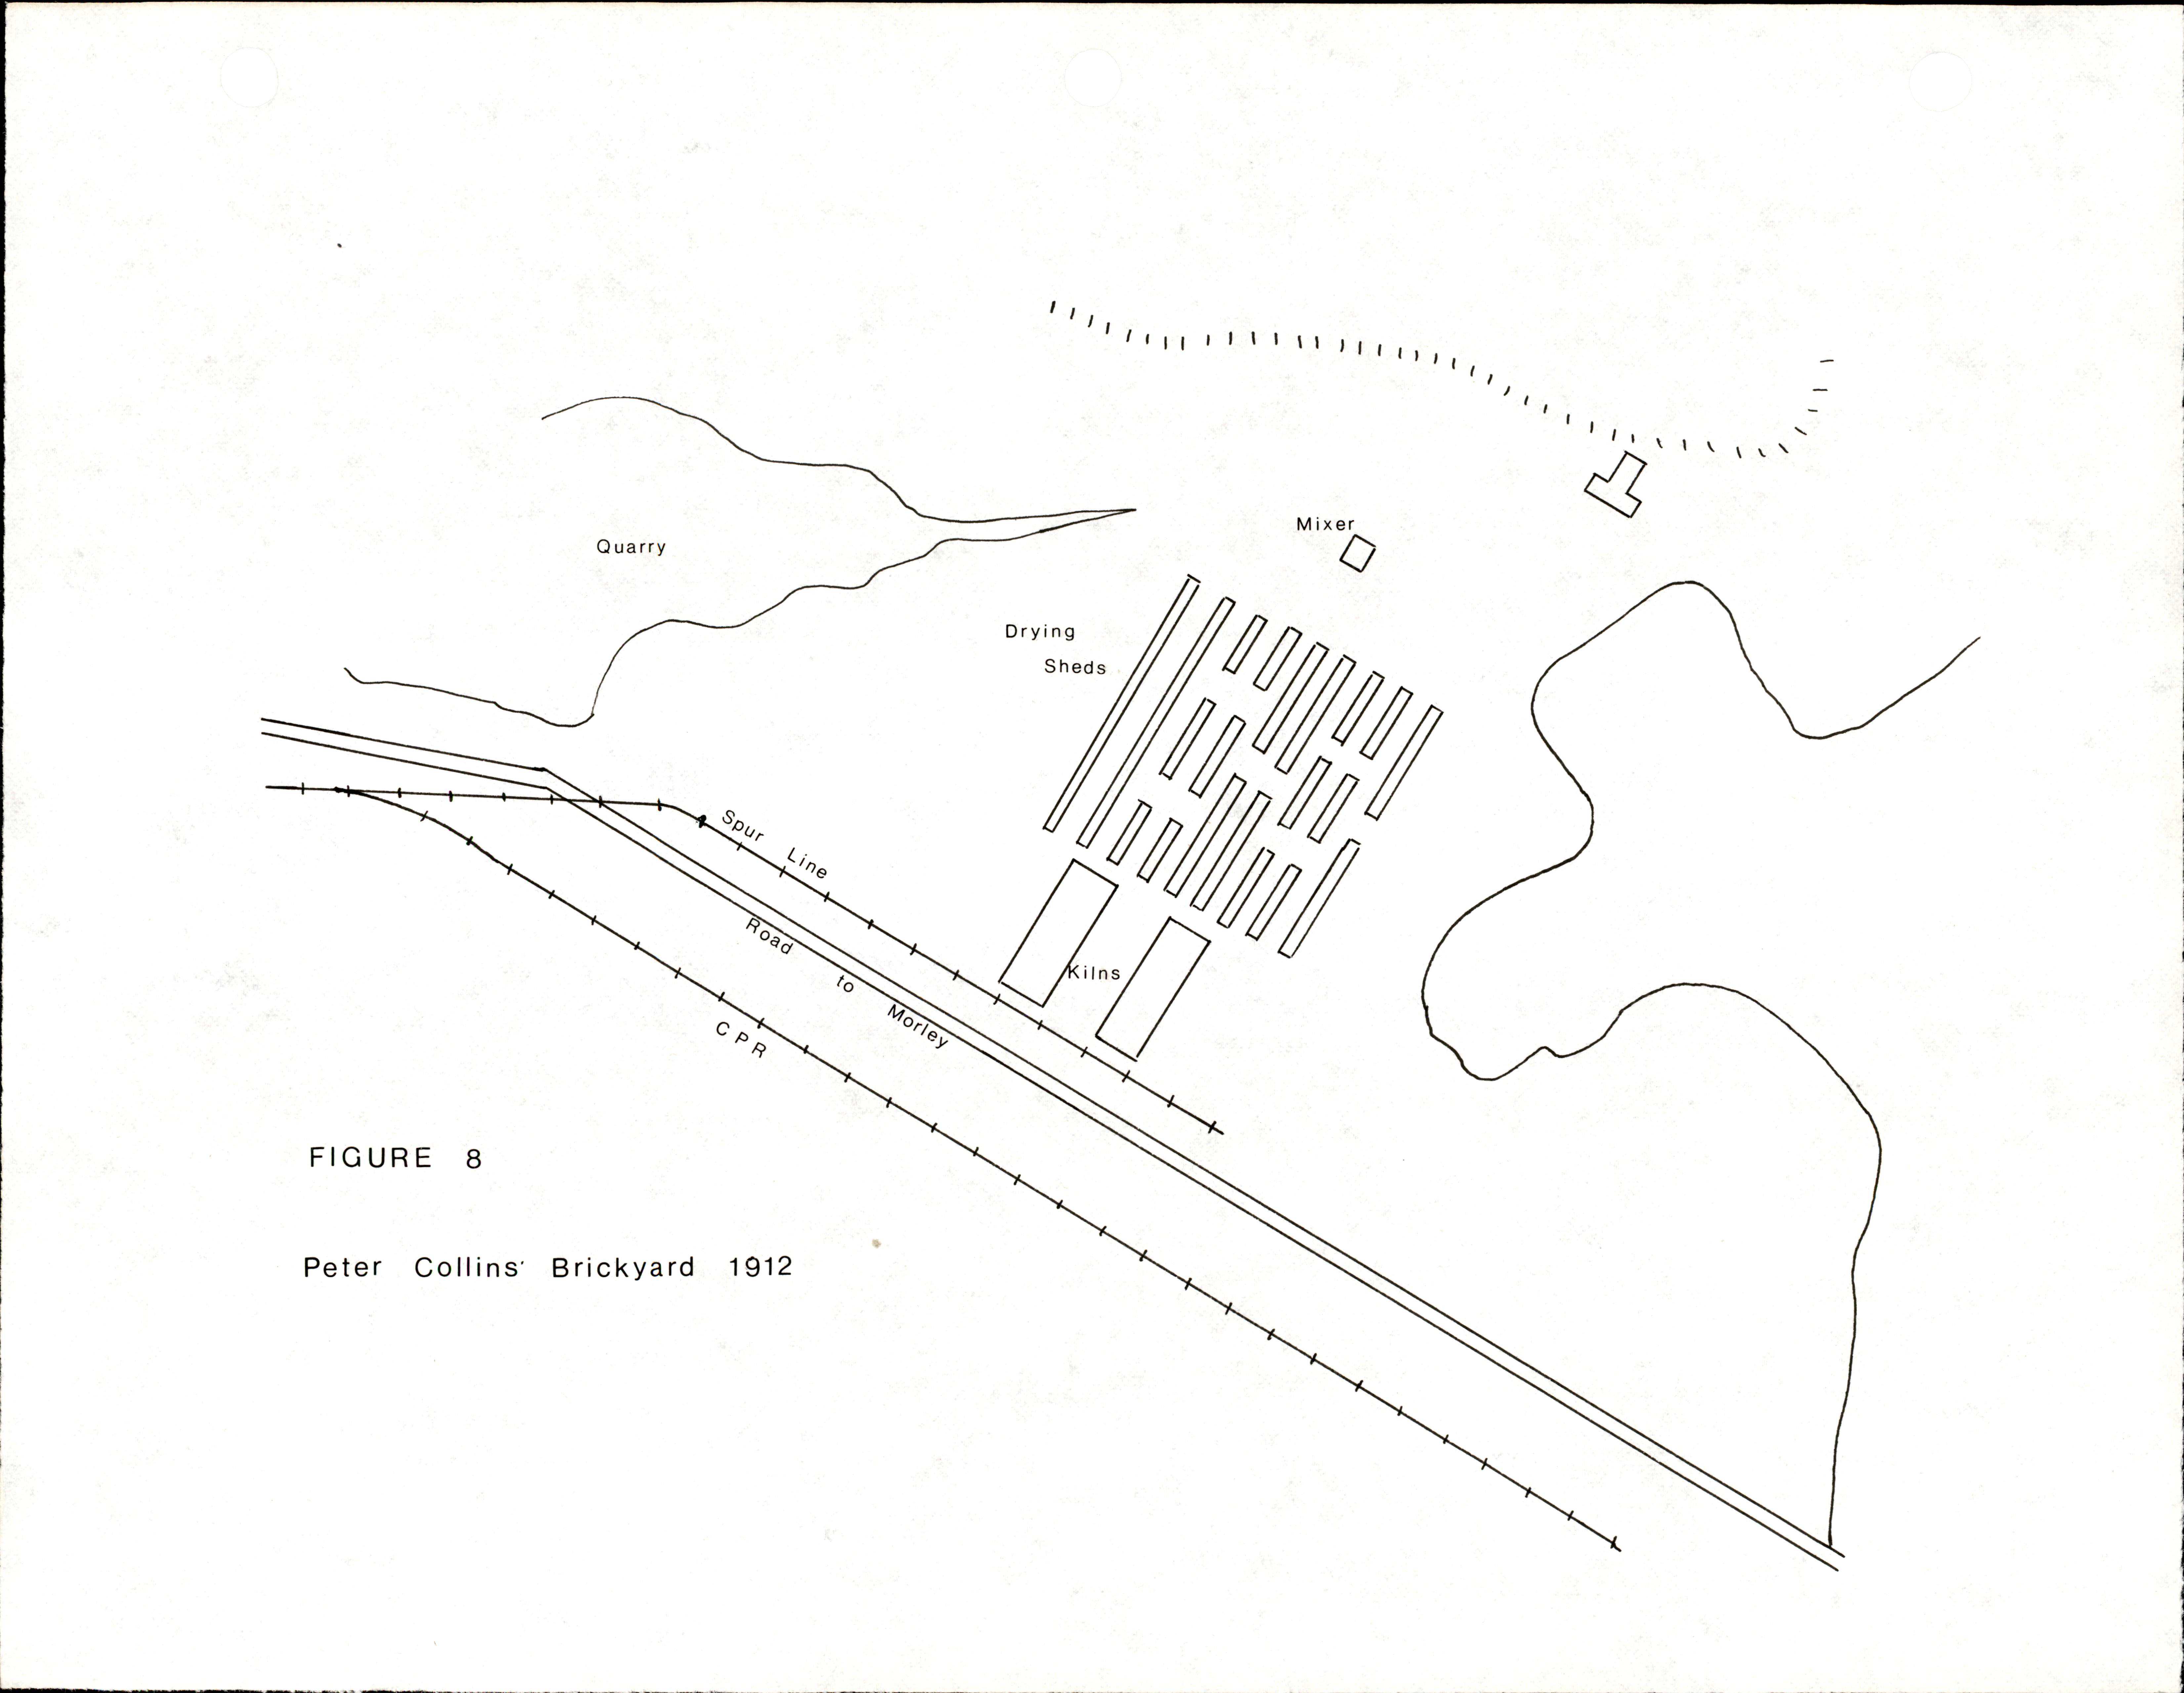 Map of the Peter Collins Brickyard  in 1912, created by by Ken Mather, 1978.